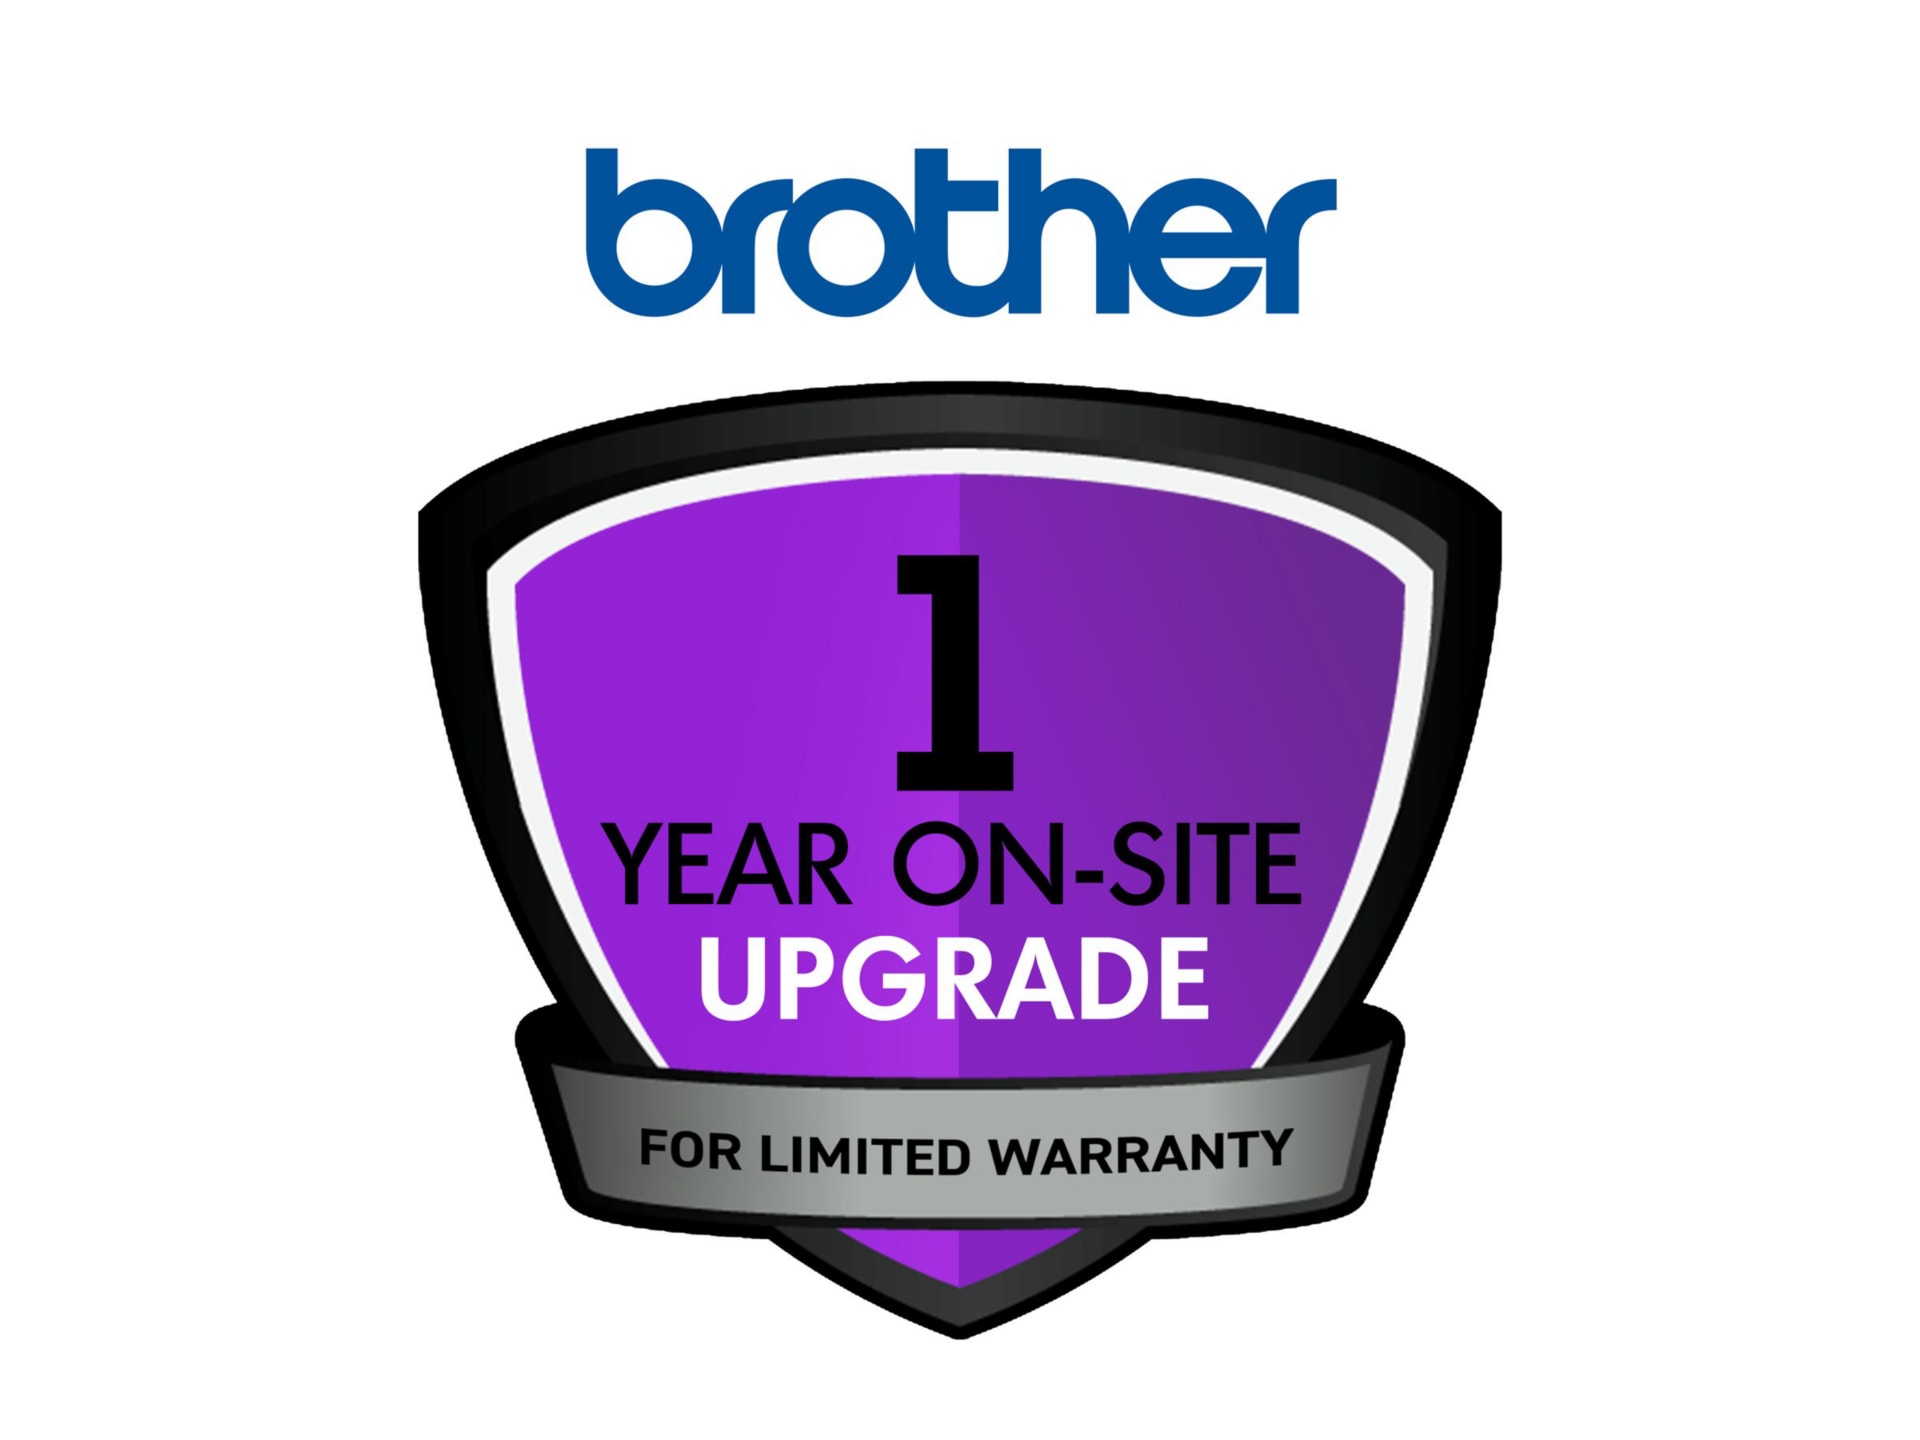 Brother Warranty Upgrade - 1 year - on-site